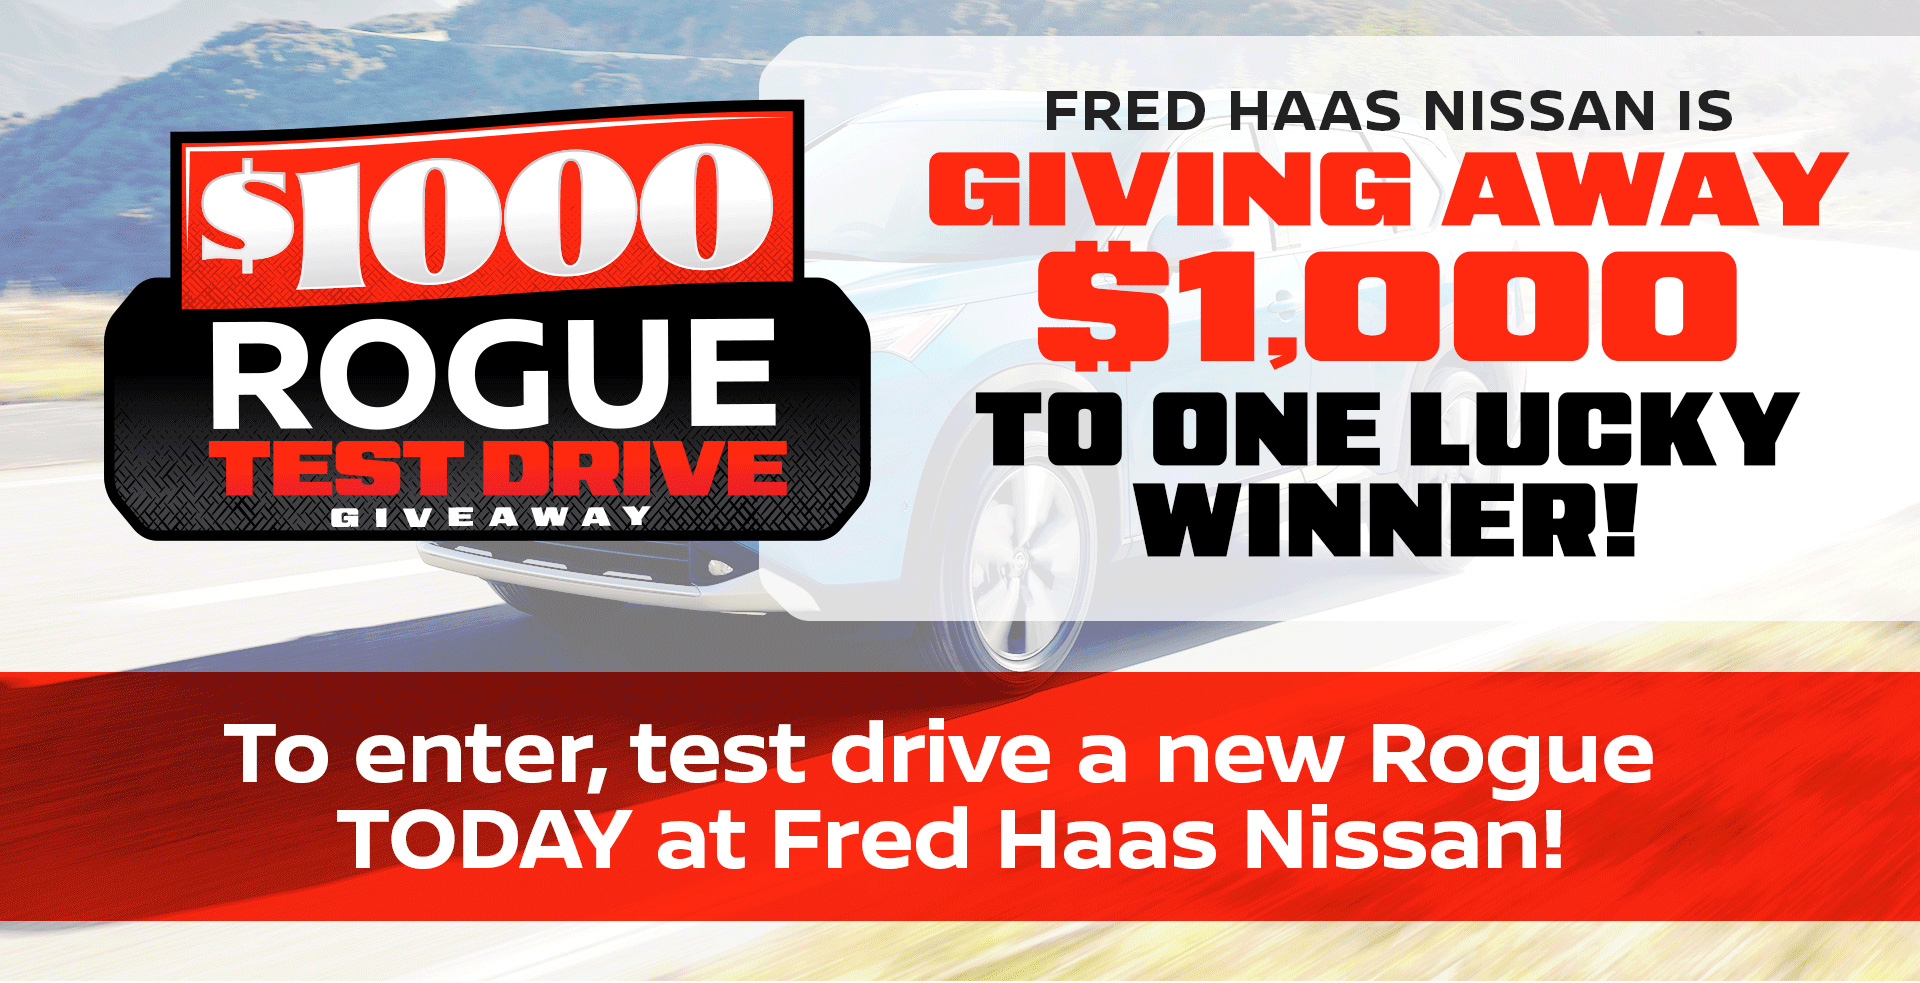 $1000 Rogue Test Drive Giveaway